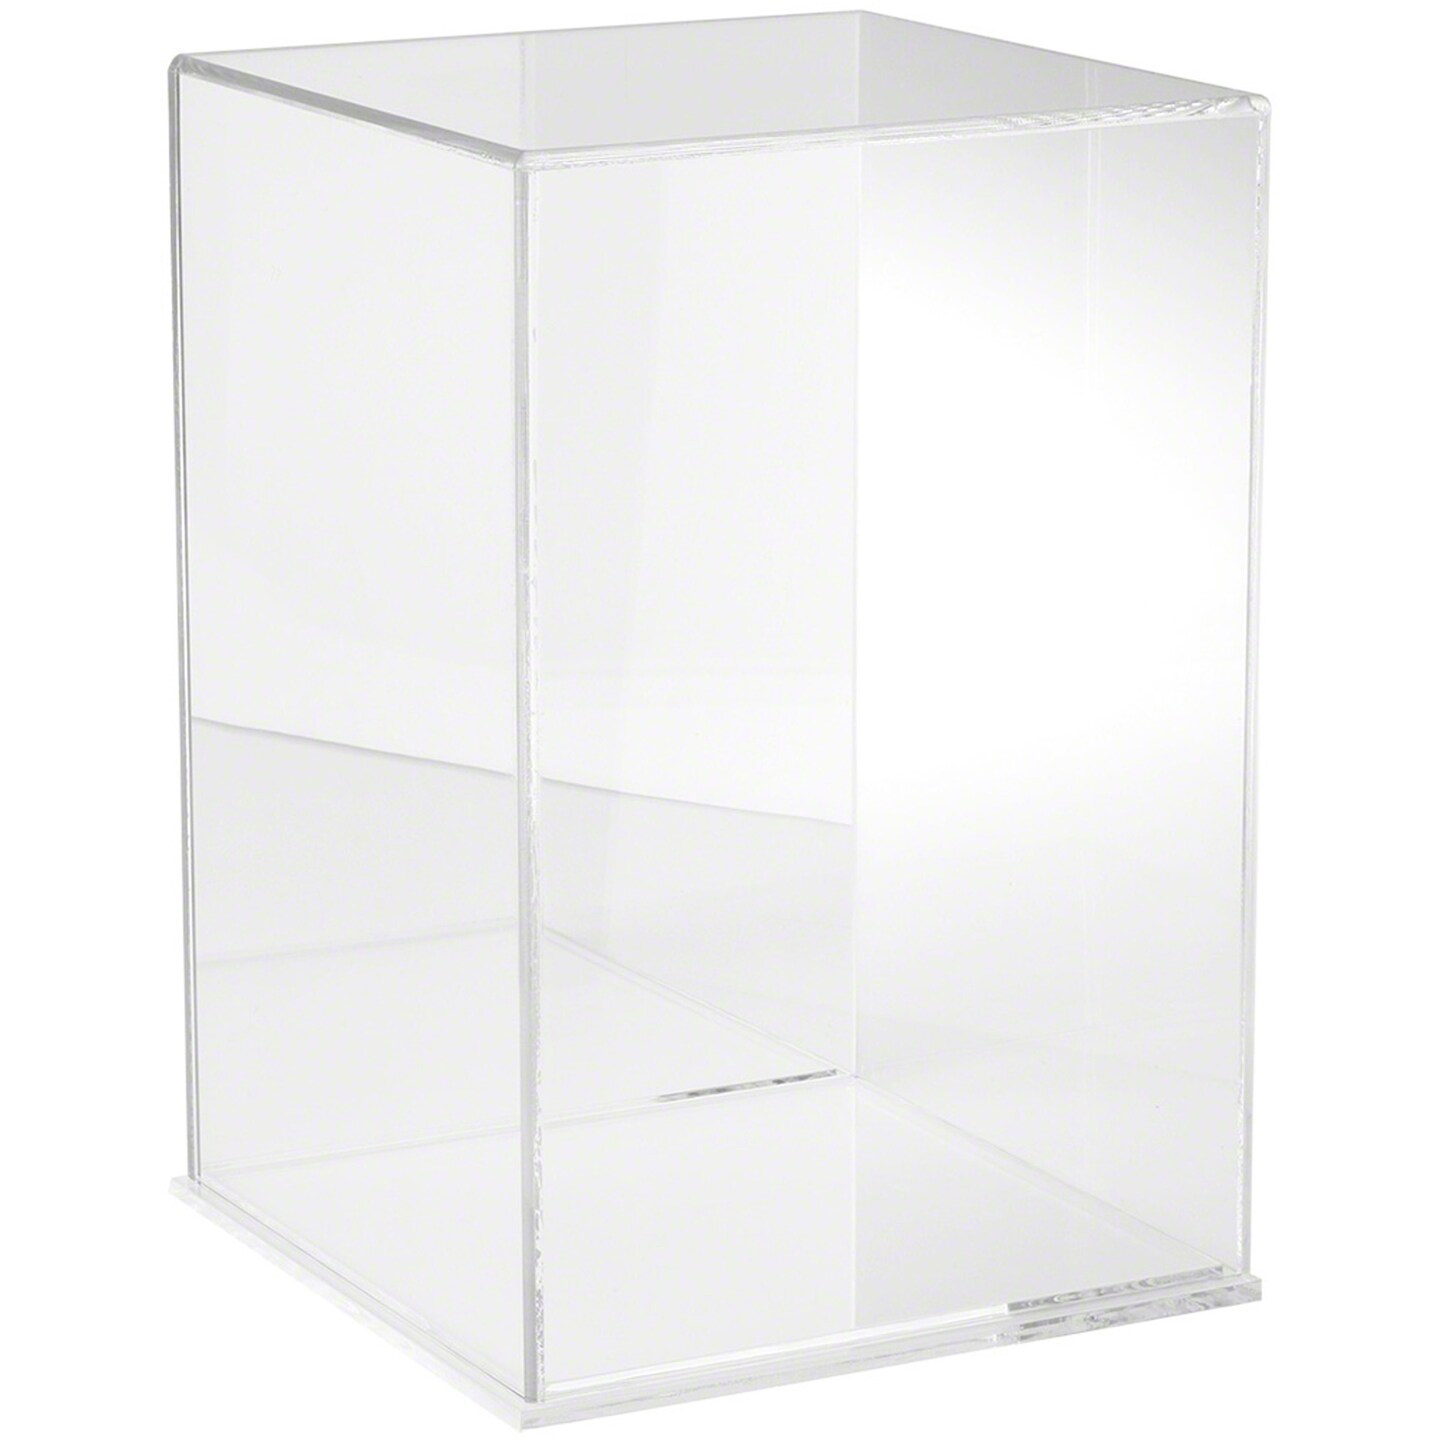 Premium Acrylic Cube Organizer with Crystals (CLEAR)